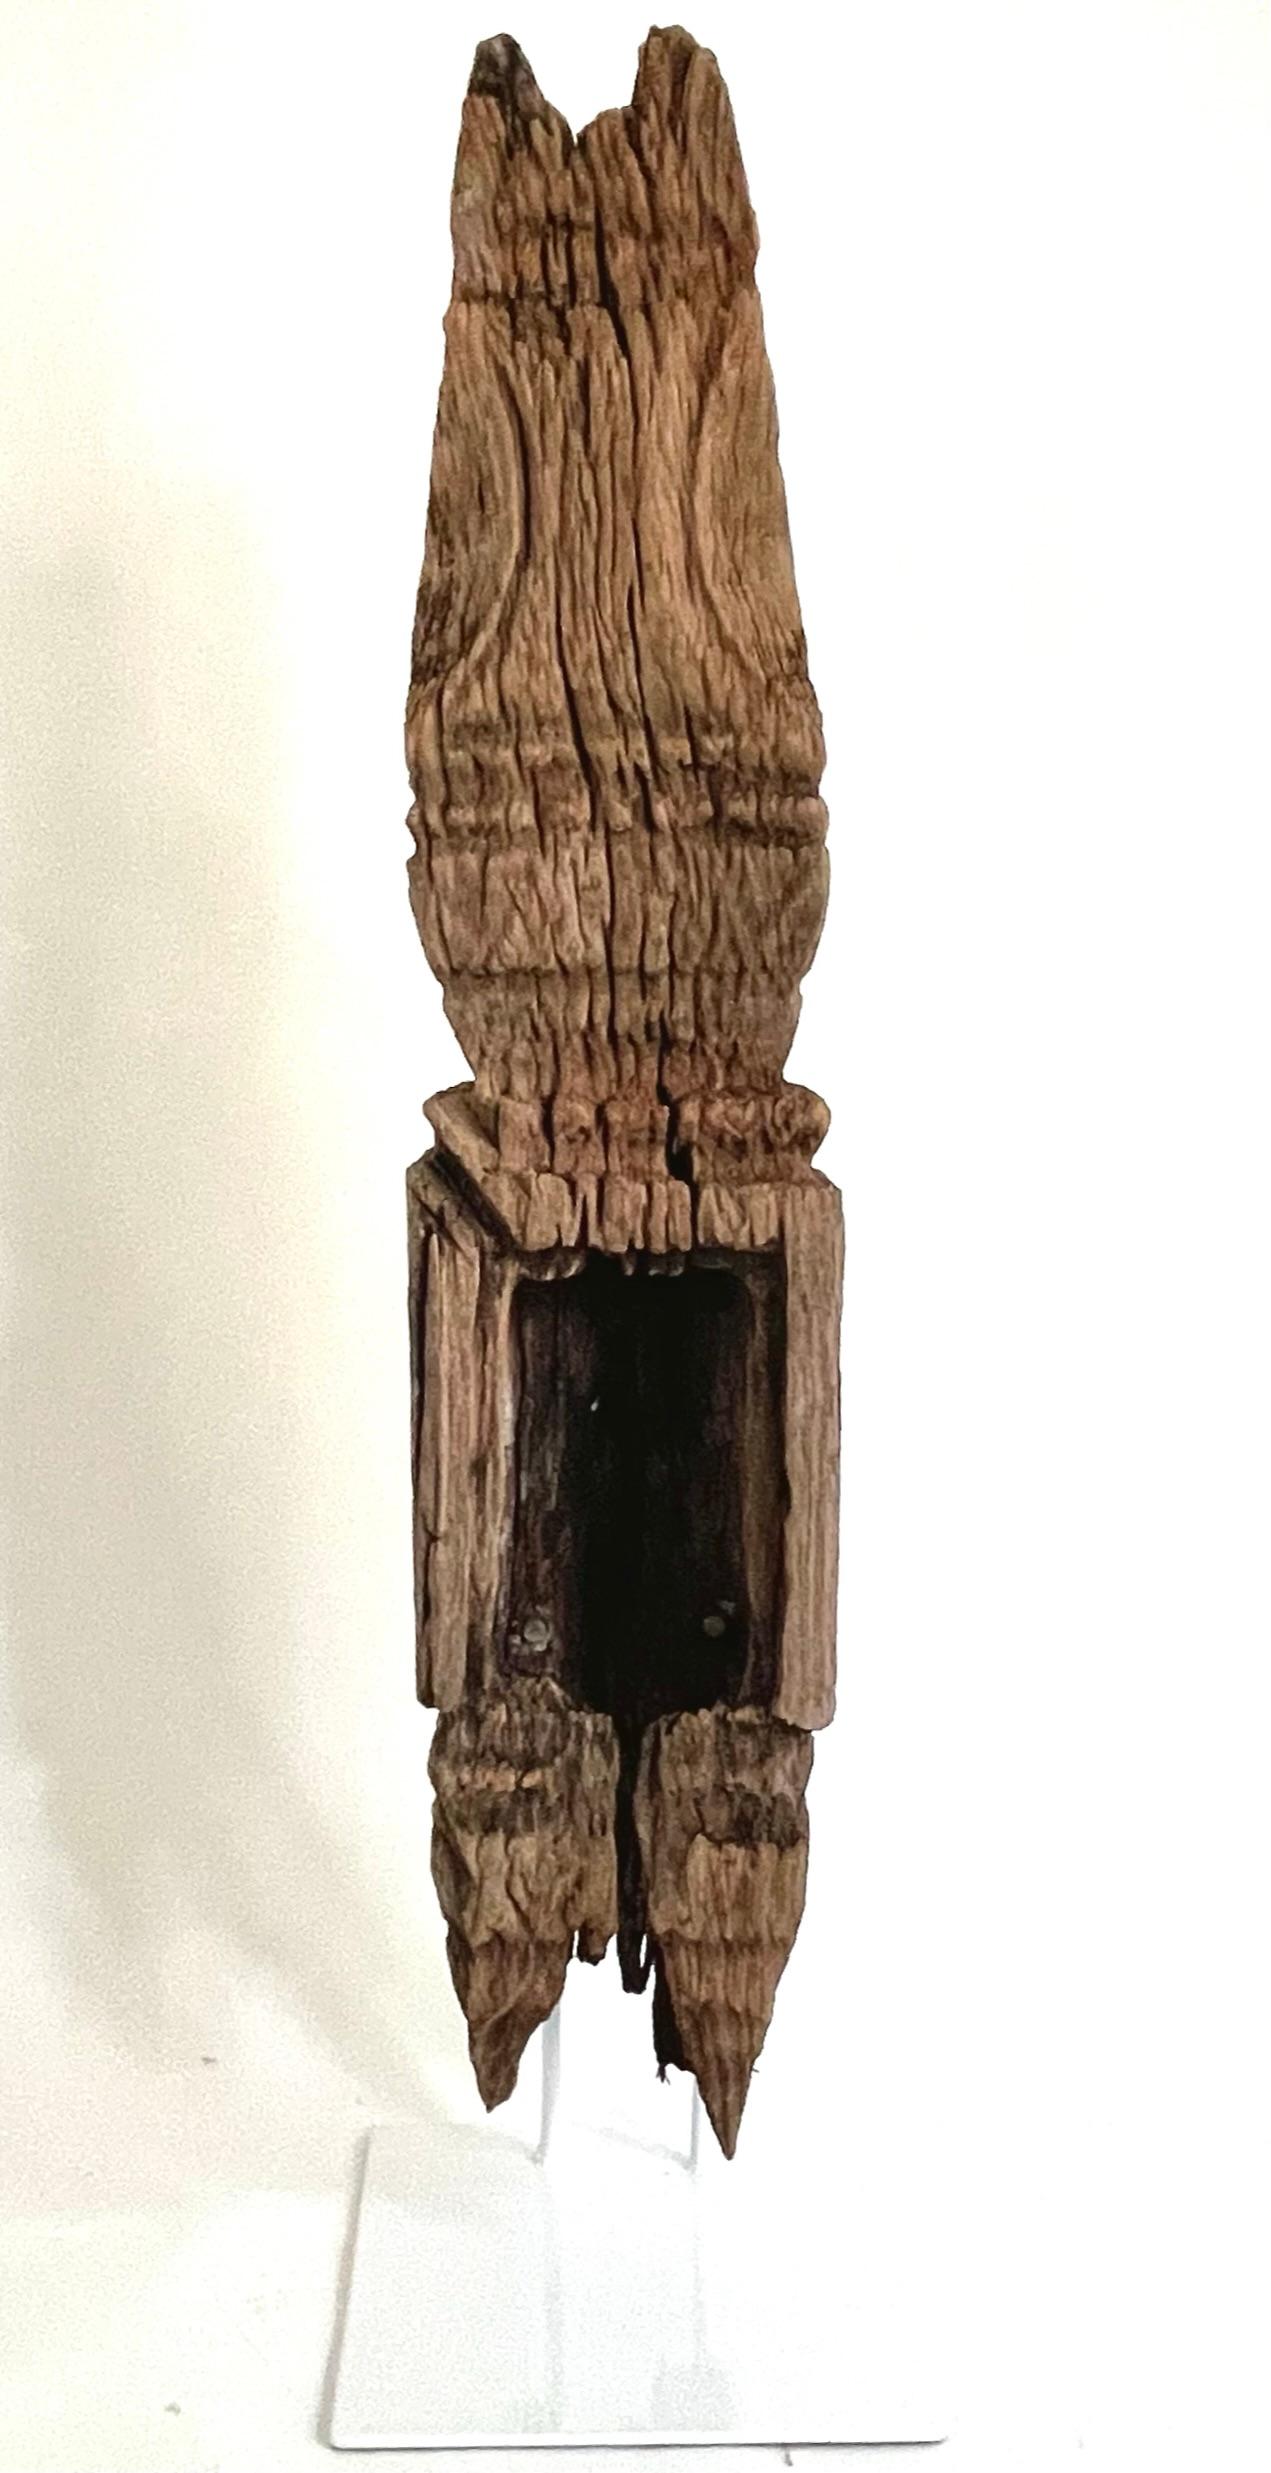 A rare 19th century Thai carved wood stupa made from the heart wood of the Teak tree. This stupa is from Isan region of the Thailand (northern Thailand, western Loas). This finely hand crafted Stupa (a small model of a Buddhist temple) was once used